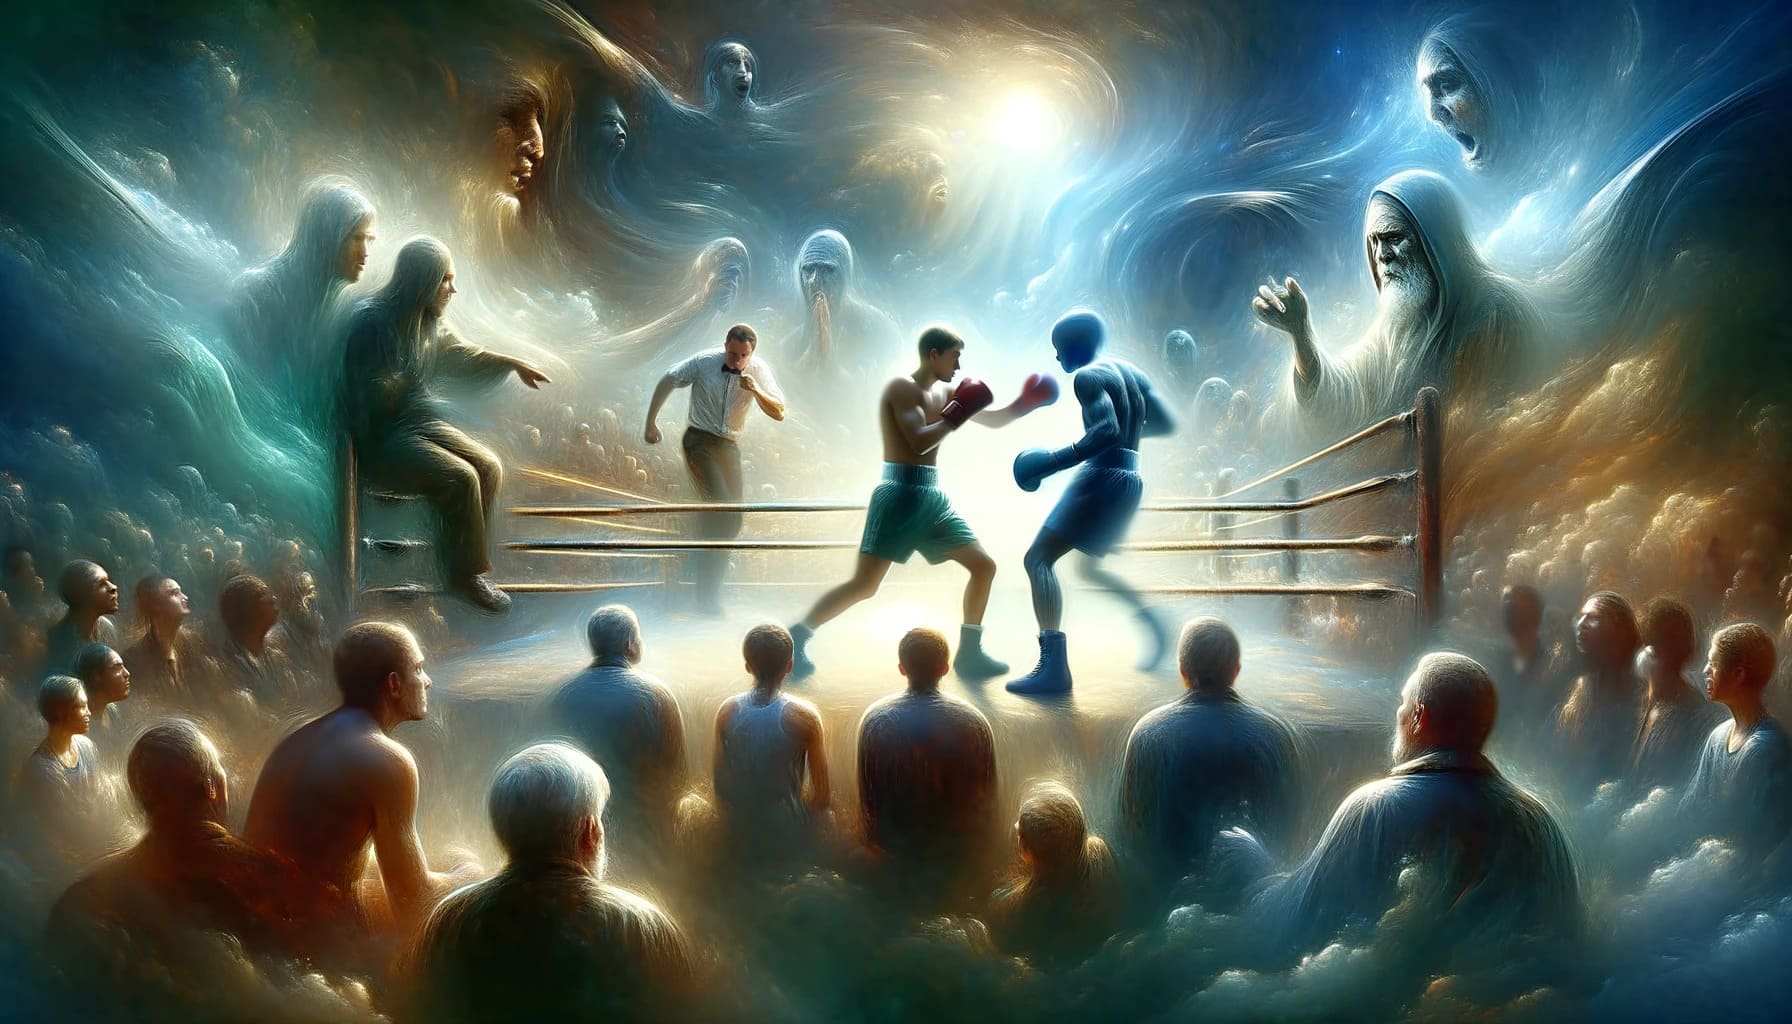 boxing match with significant contextual element